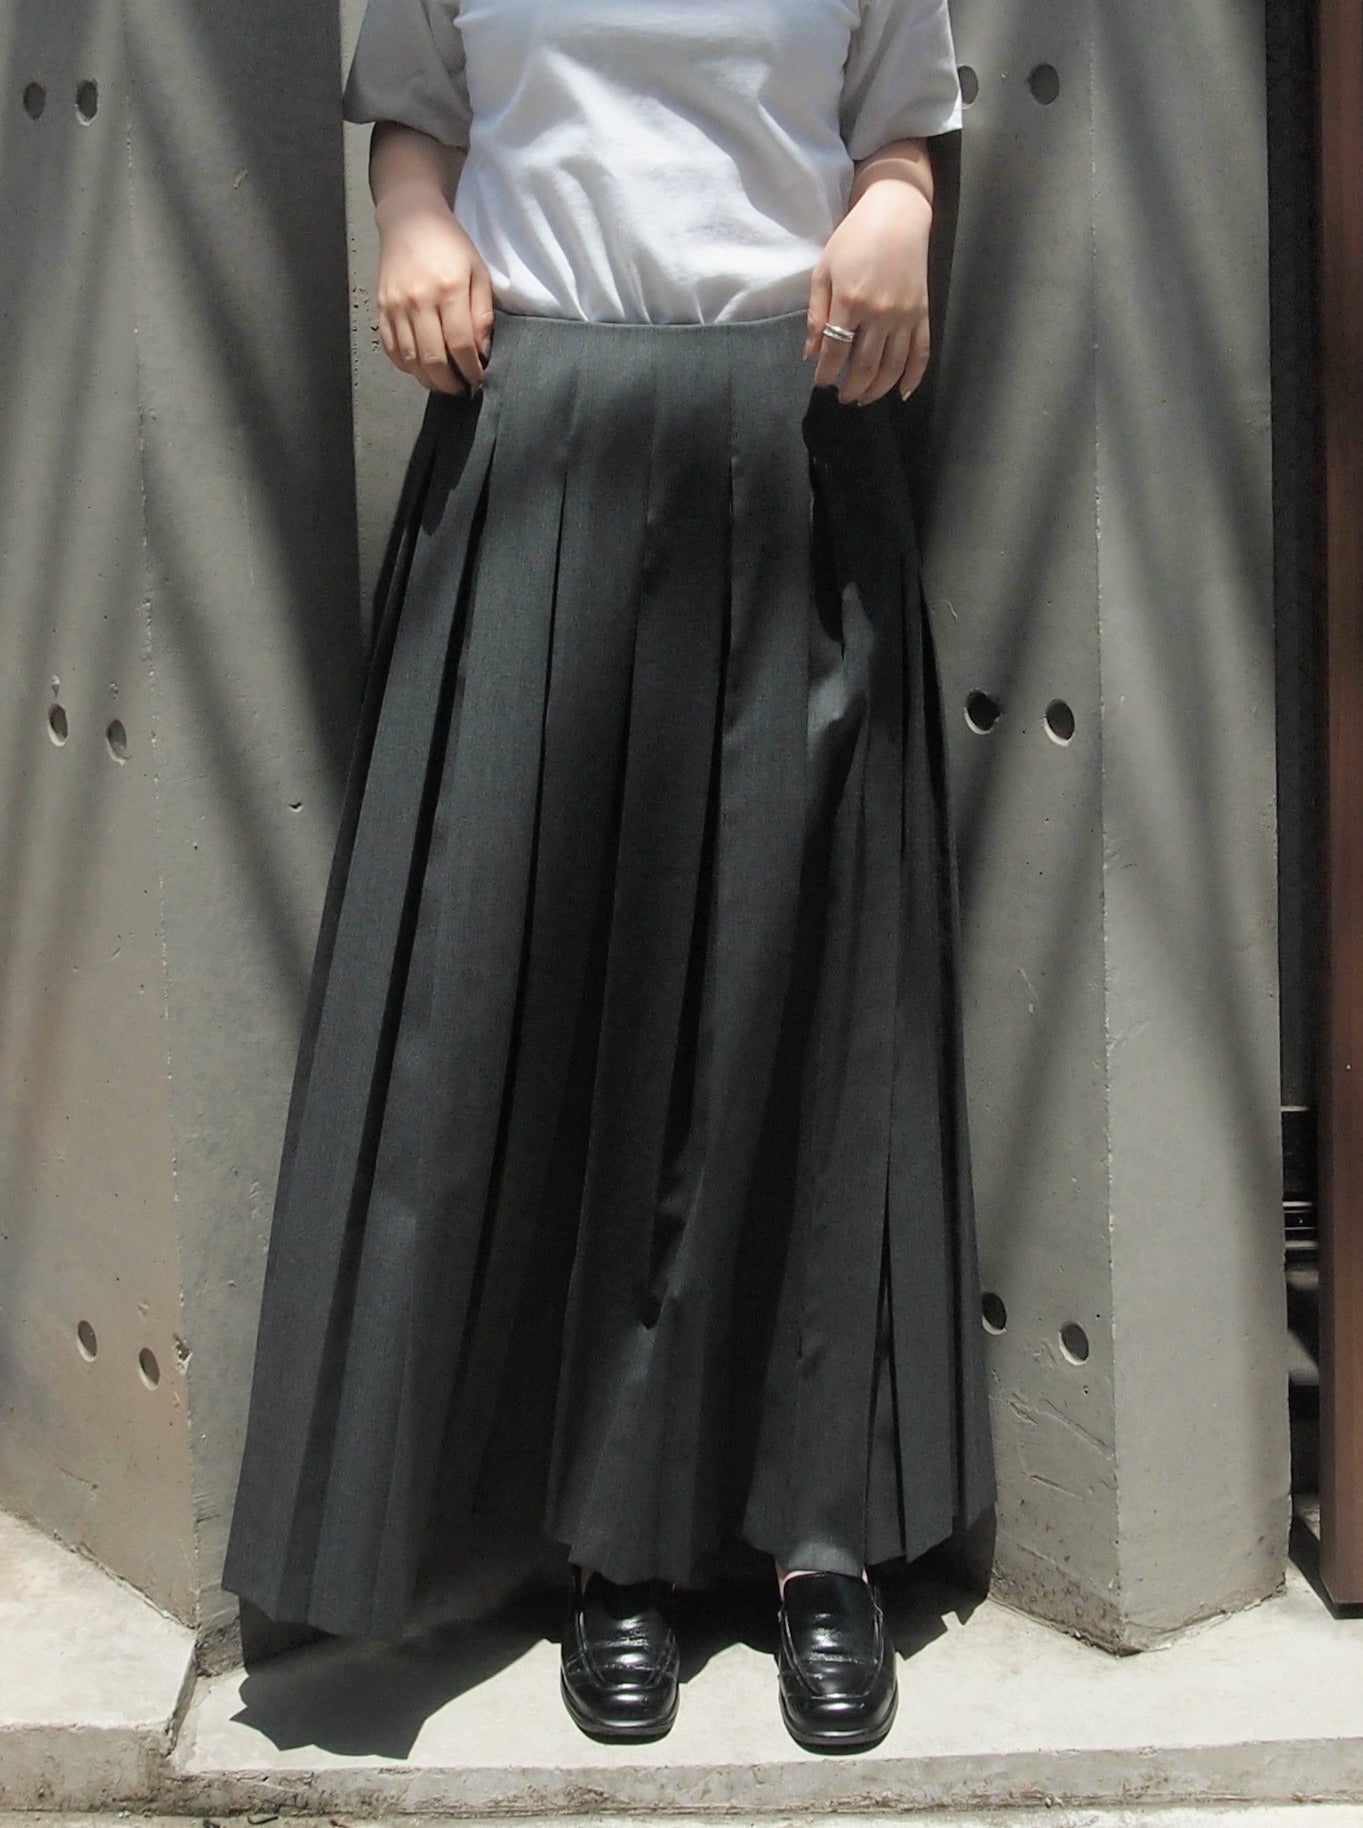 studiolab404.com] Angels Factory Pleated Skirt by 404